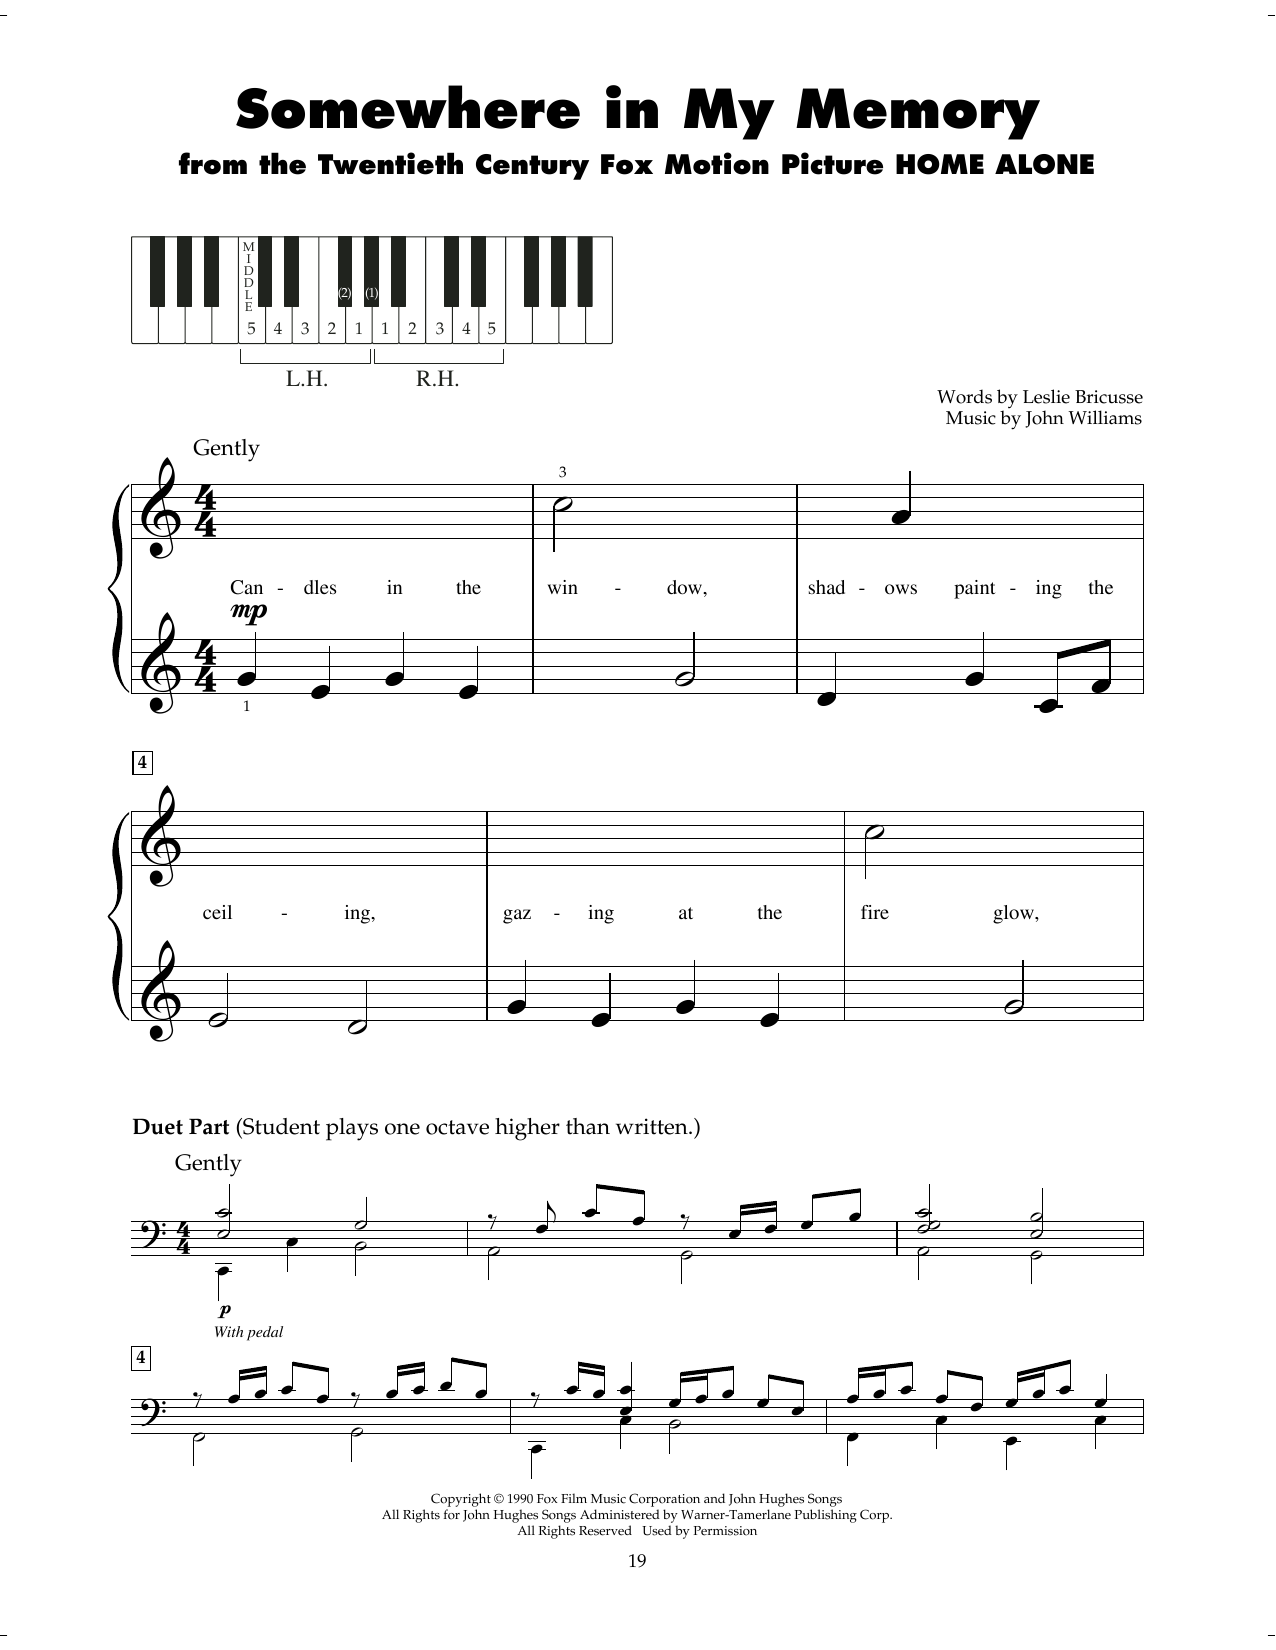 John Williams Somewhere In My Memory (from Home Alone) sheet music notes printable PDF score